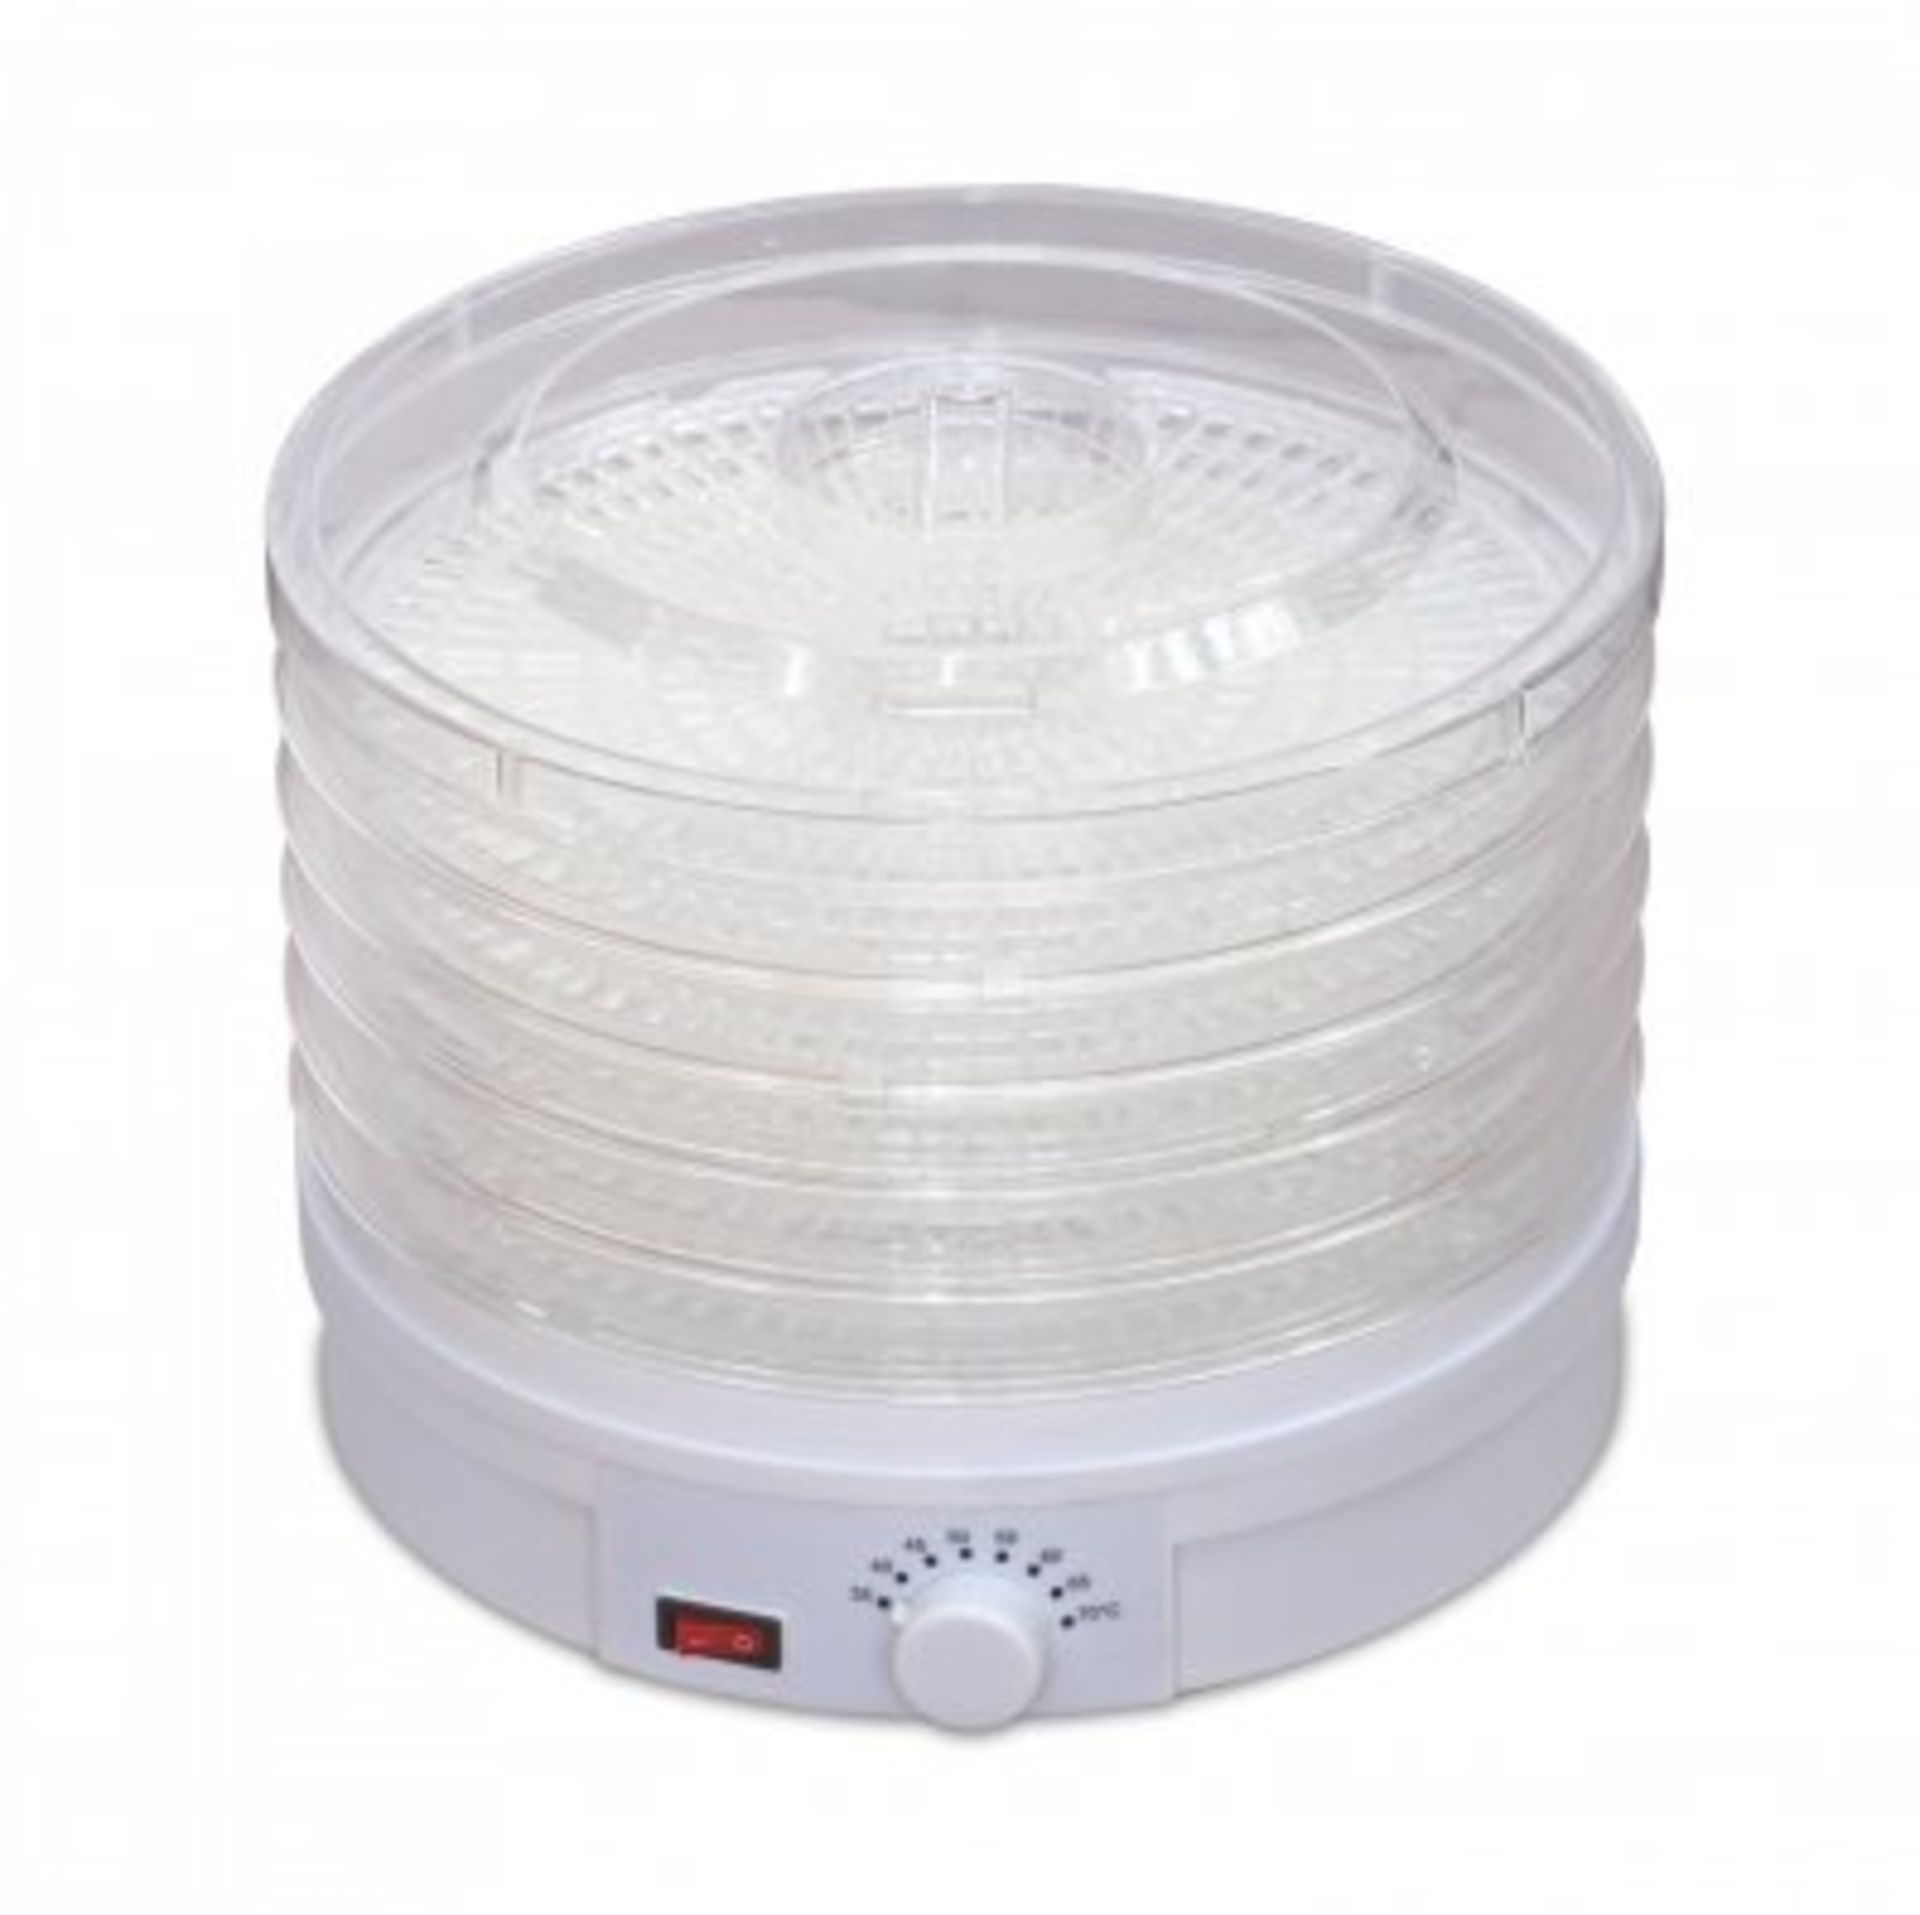 (RU16) Food Dehydrator Machine with Thermostat Control The Food Dehydrator uses a Flow-...